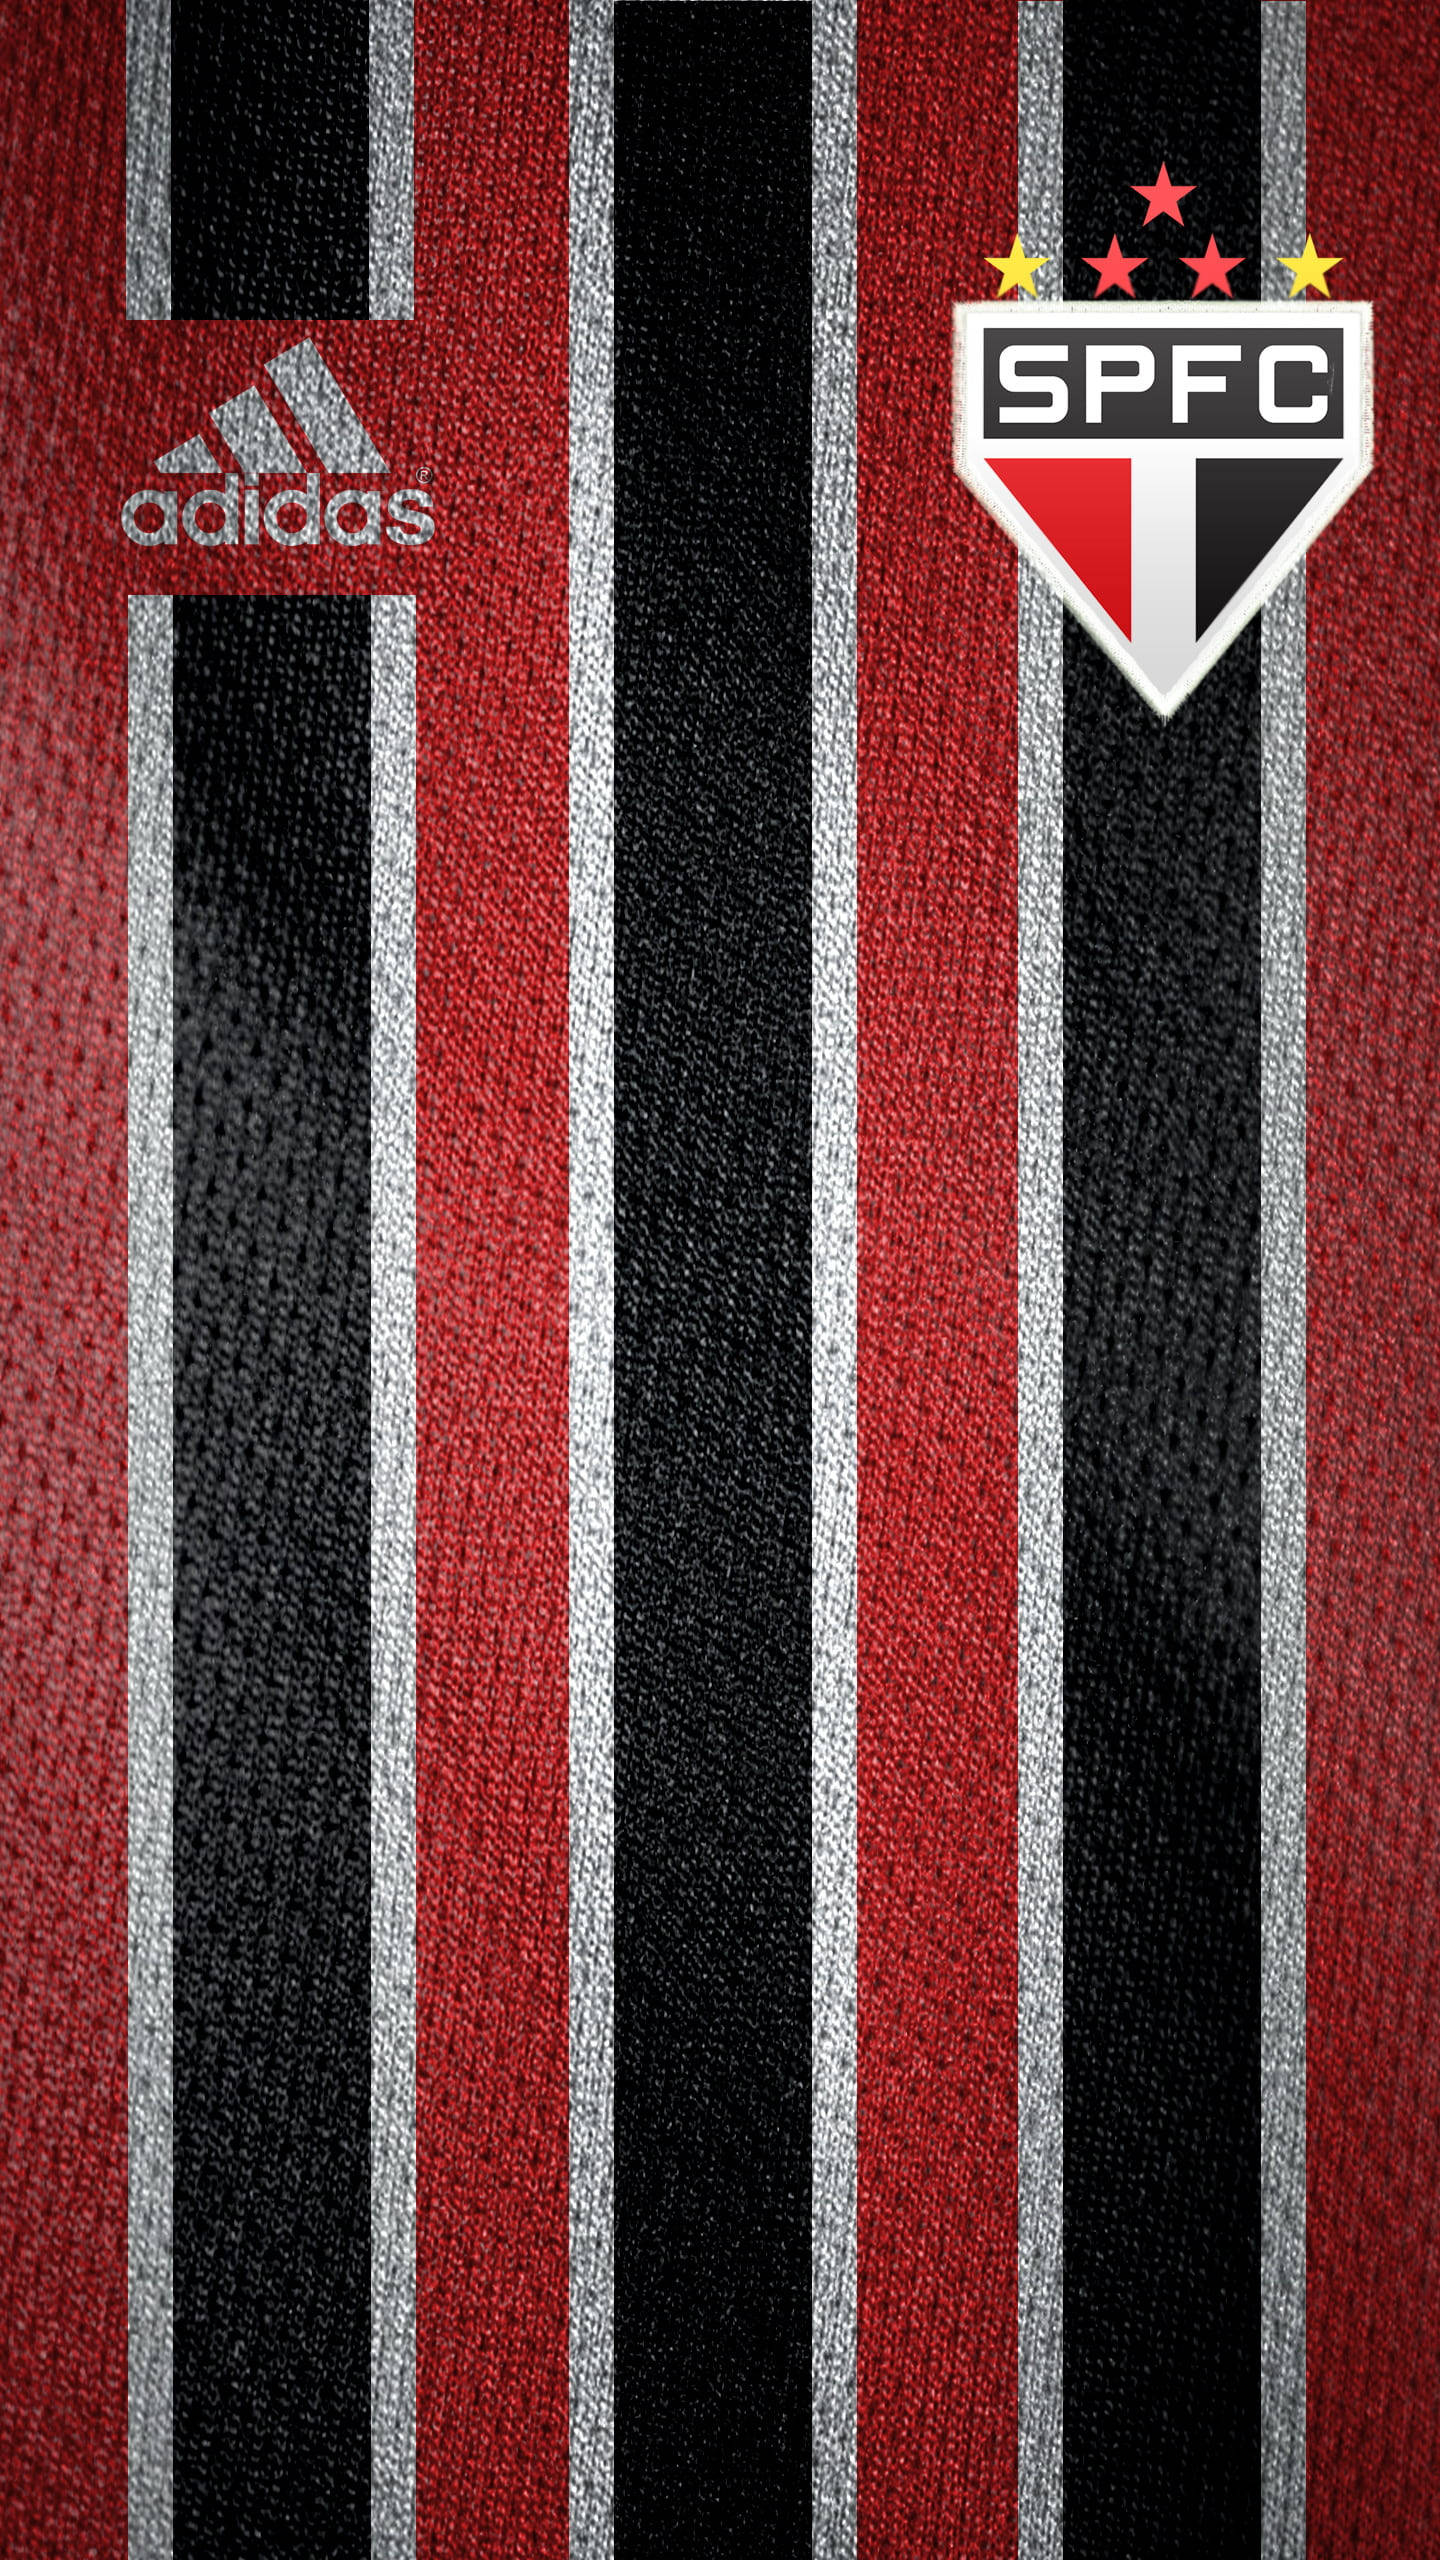 Download Sao Paulo Fc And Red Adidas Logo Wallpaper 